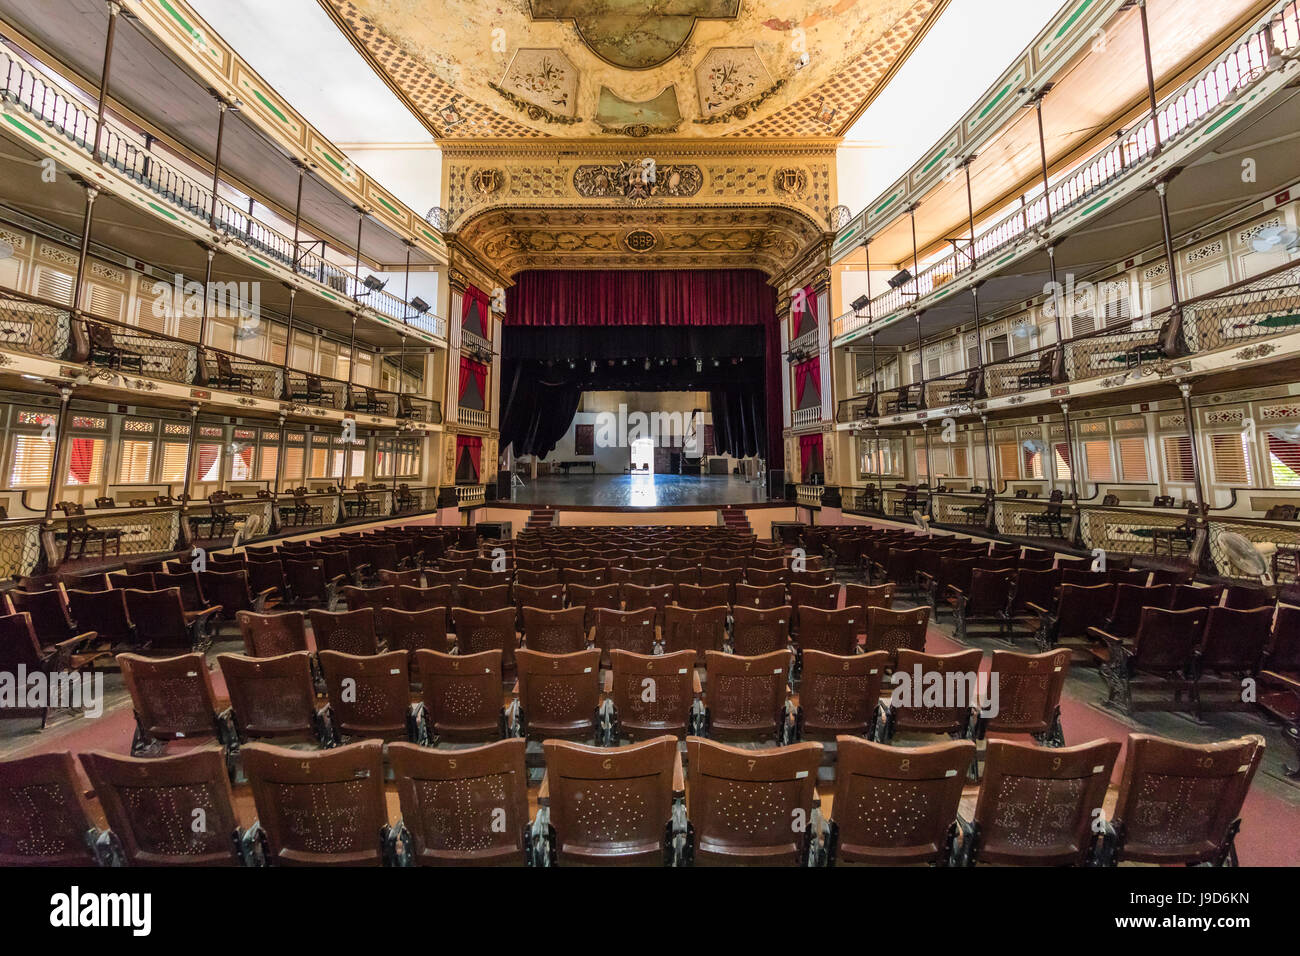 Interior view of the Teatro Tomas Terry (Tomas Terry Theatre), opened in 1890 in the city of Cienfuegos, UNESCO, Cuba, Caribbean Stock Photo